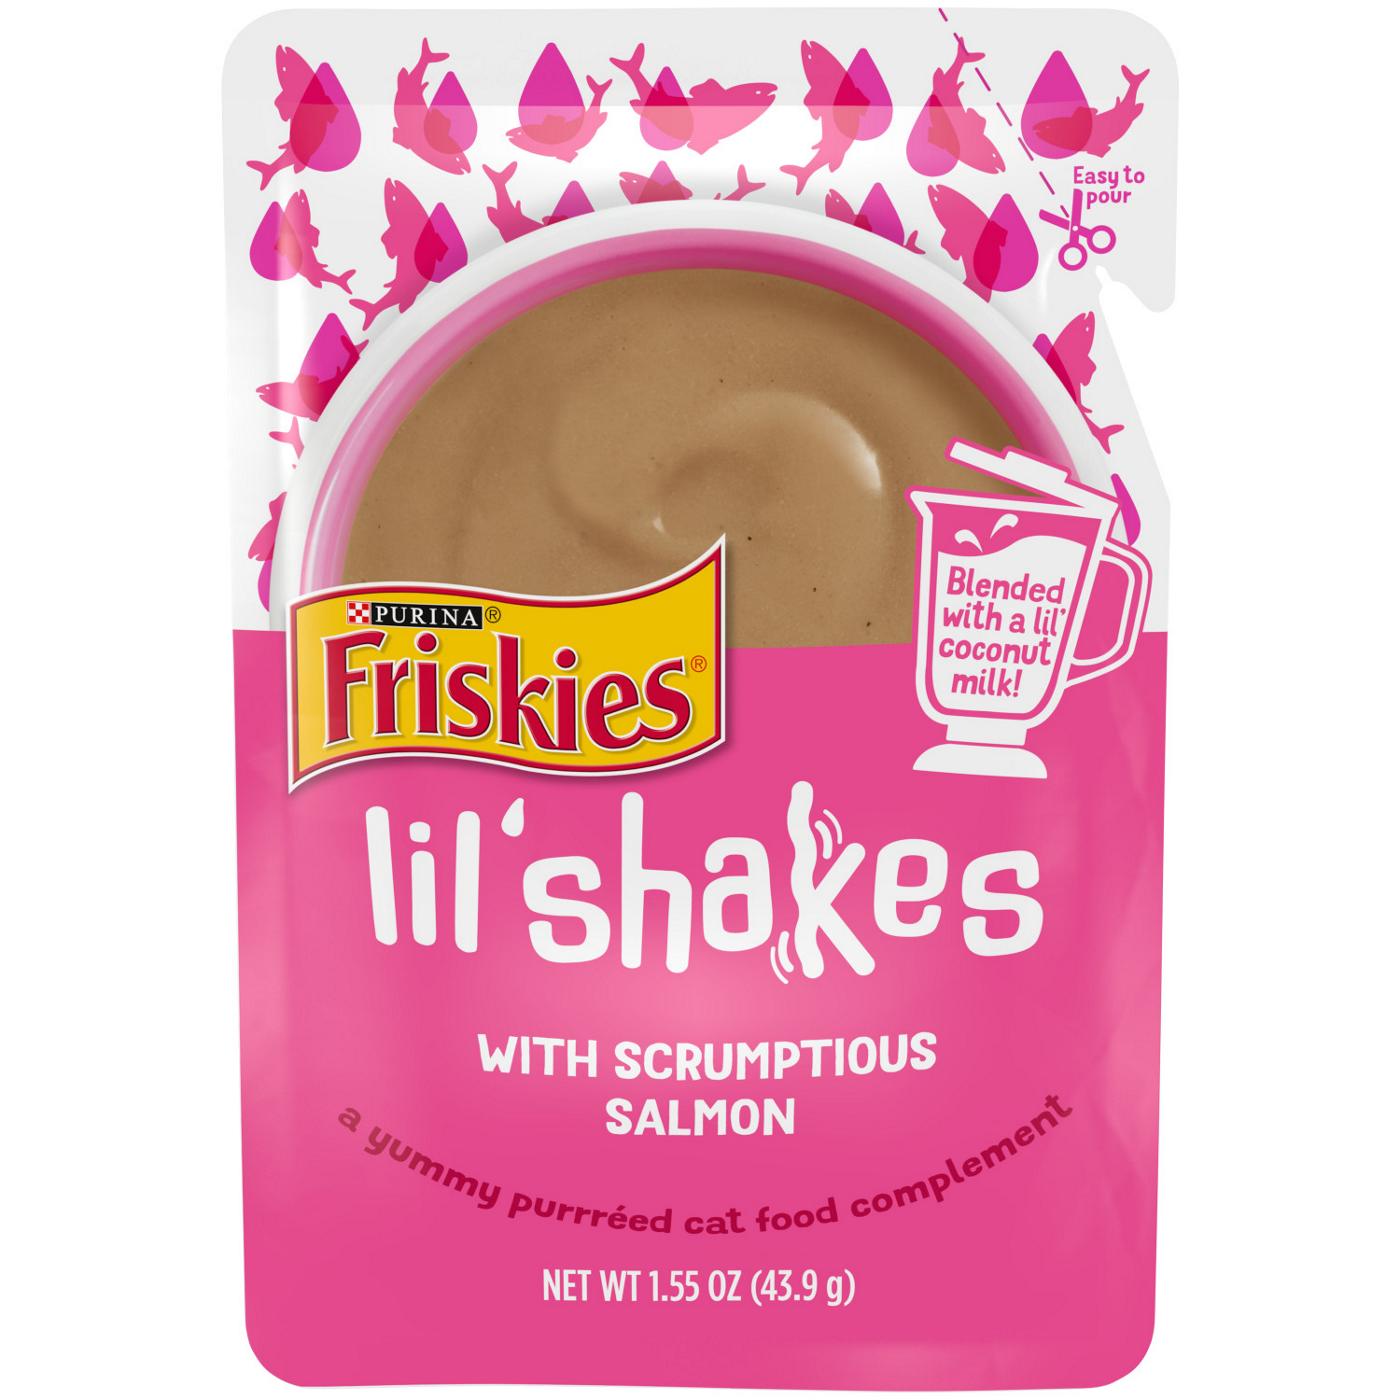 Friskies Purina Friskies Pureed Cat Food Topper, Lil’ Shakes With Scrumptious Salmon Lickable Cat Treats; image 1 of 8